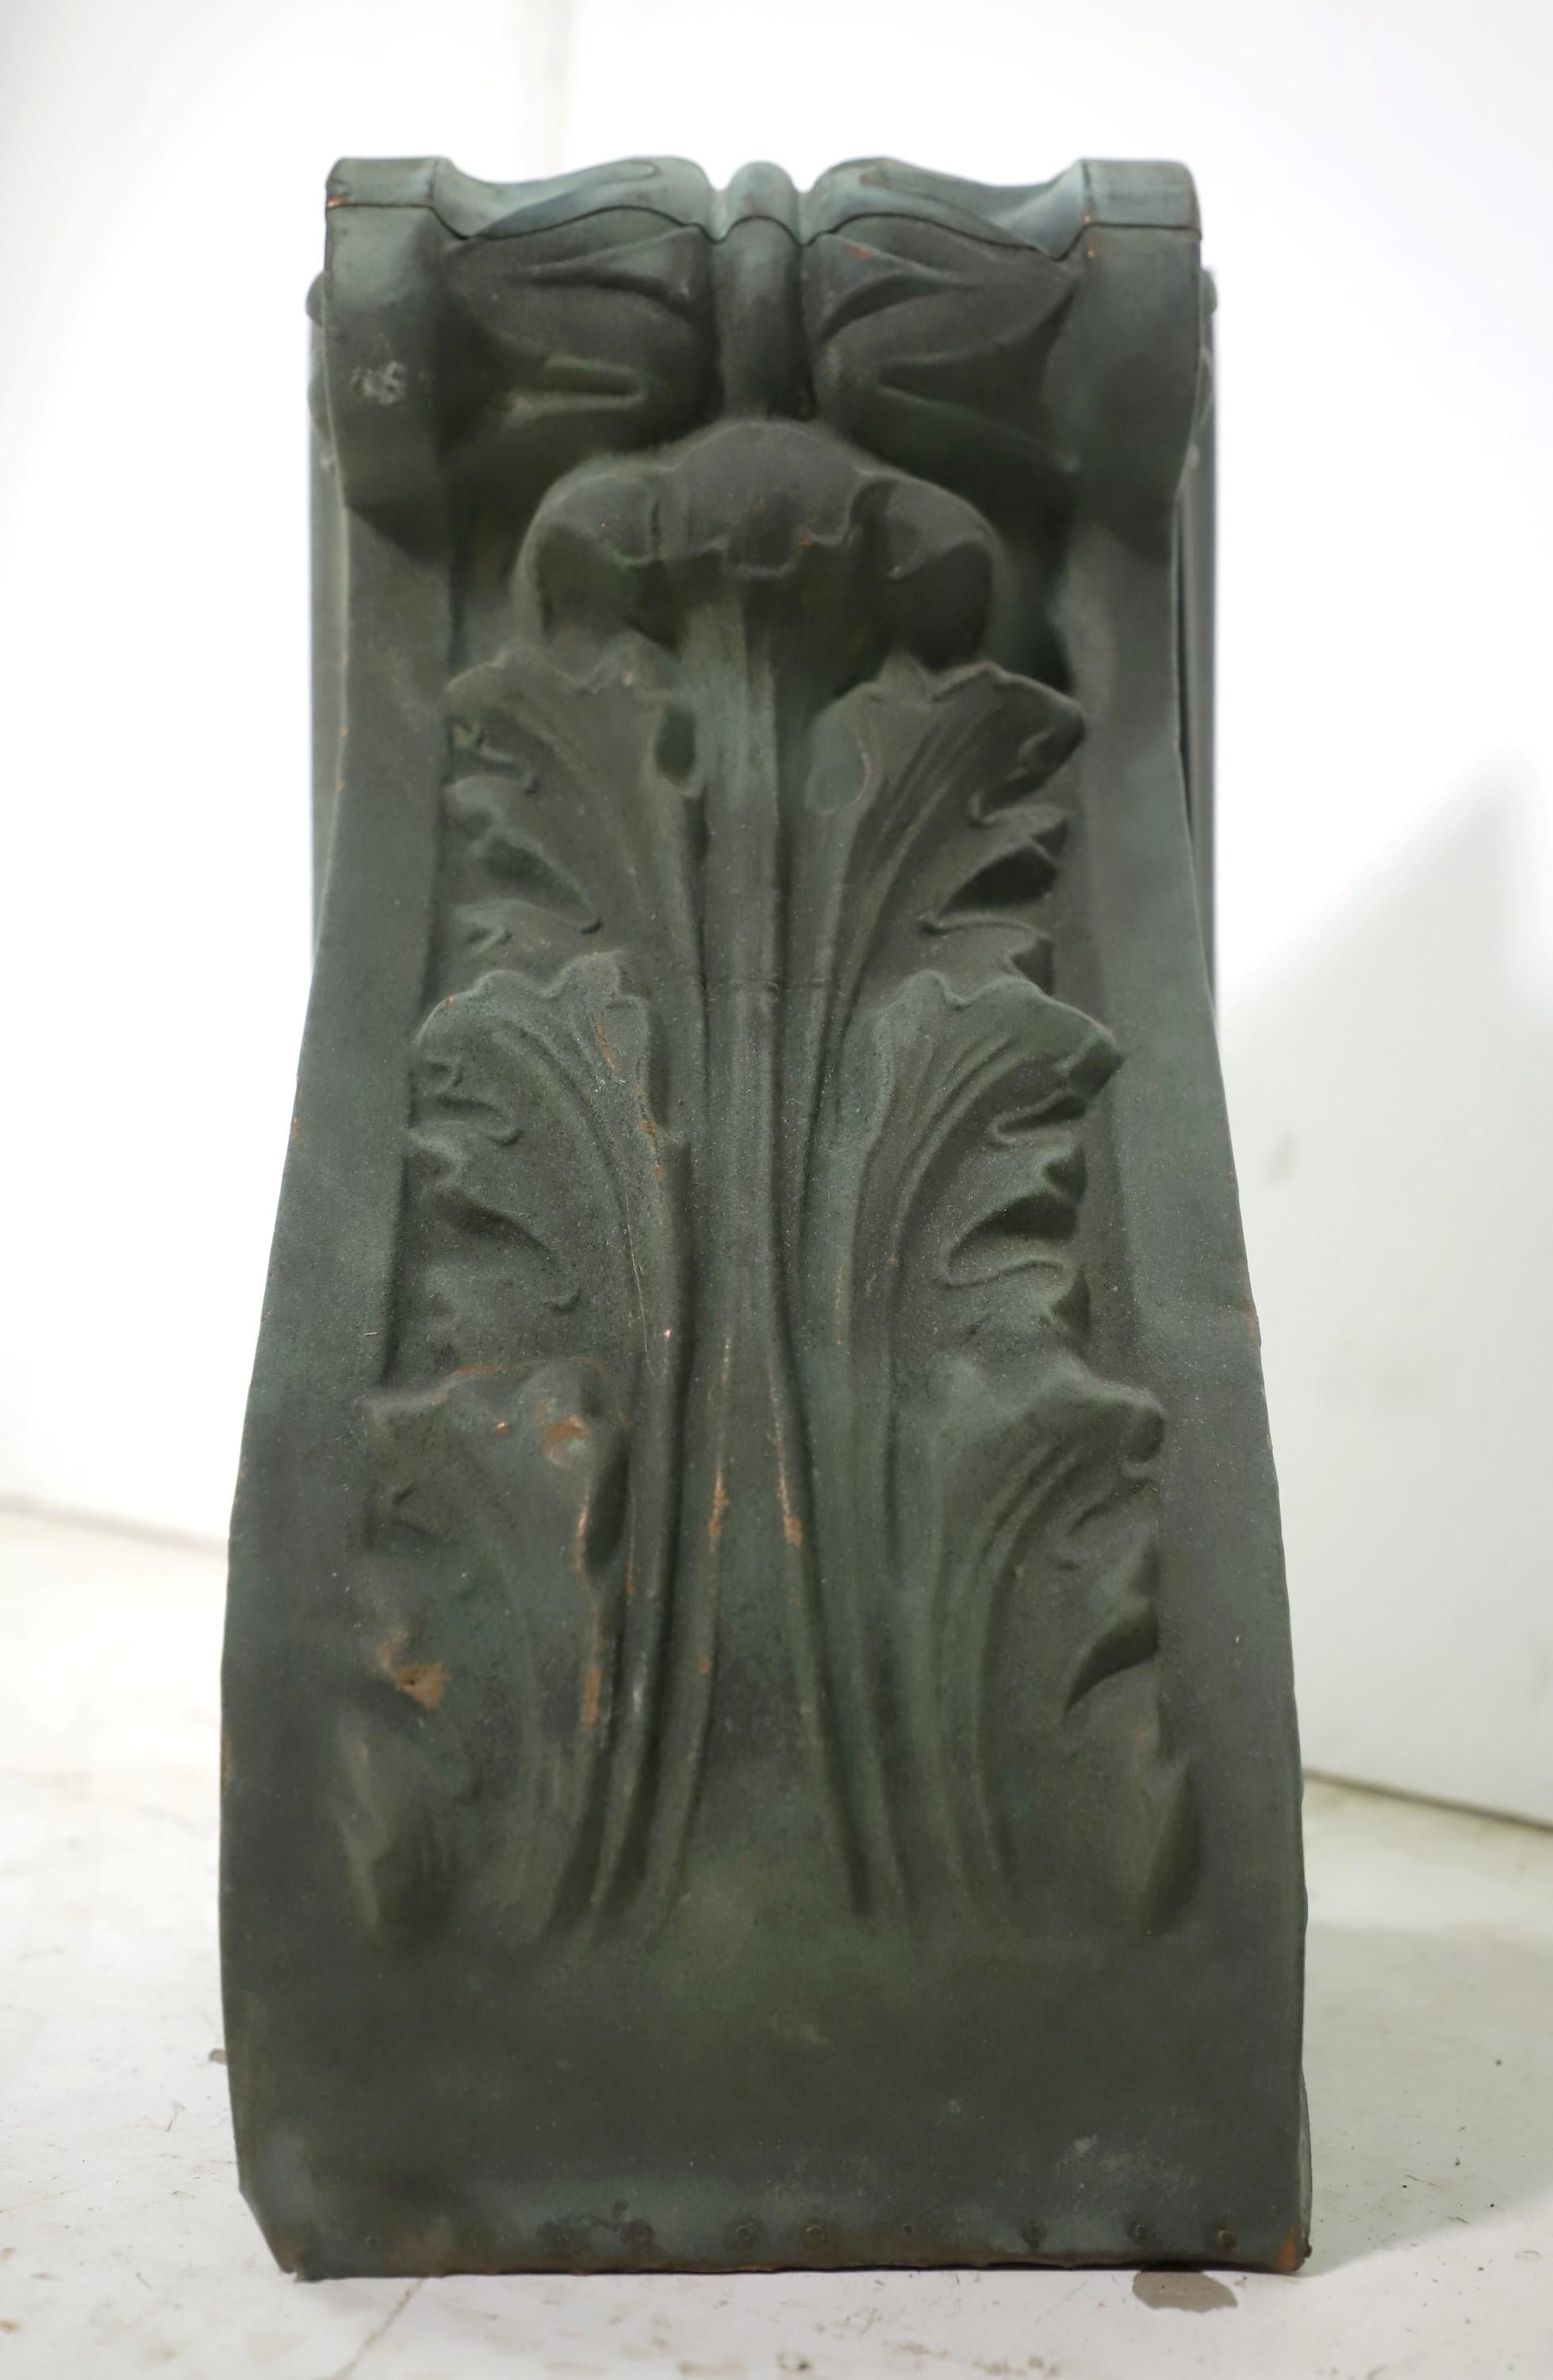 Small recovered original verdigris patina copper corbel with ornate designs. We installed a wood backing for ease in wall mounting. This is in good condition. Please note, this item is located in our Scranton, PA location.